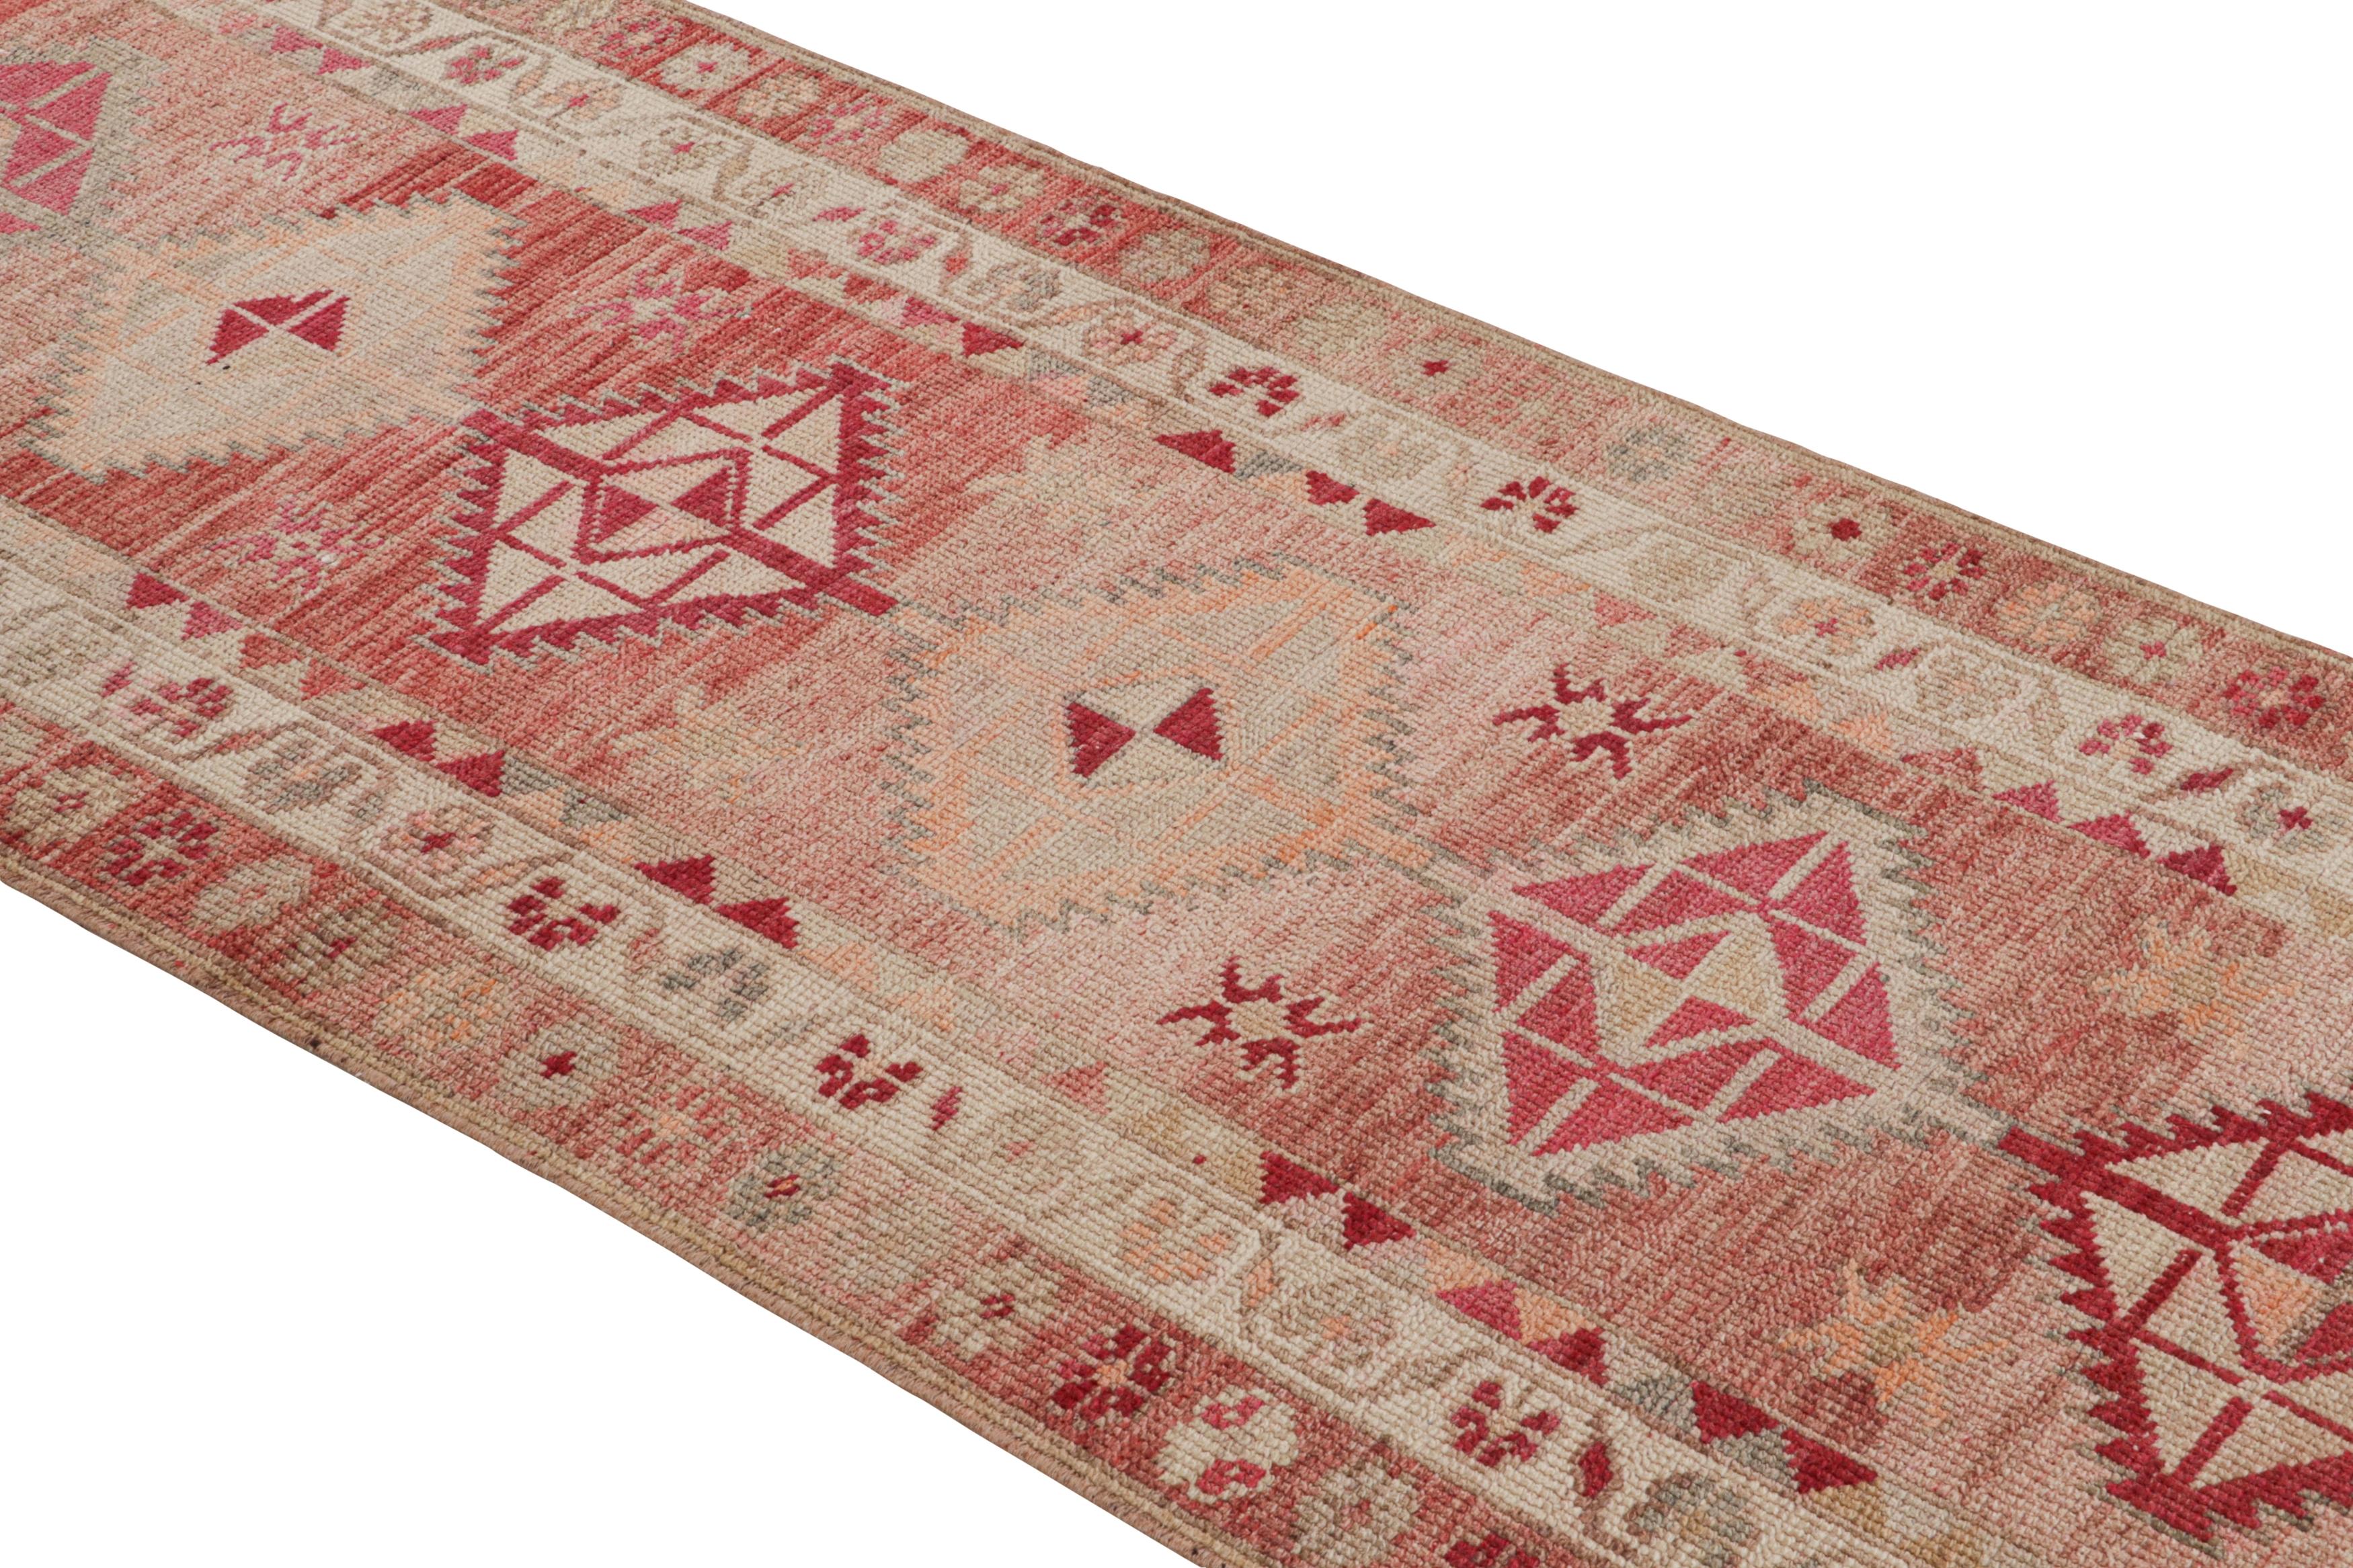 Hand knotted in wool originating from Turkey circa 1950-1960, this 3x12 vintage runner connotes a mid-century tribal rug design of intriguing colorway diversity, playing lively, unique accents against an abrashed striation of red and pink tones for